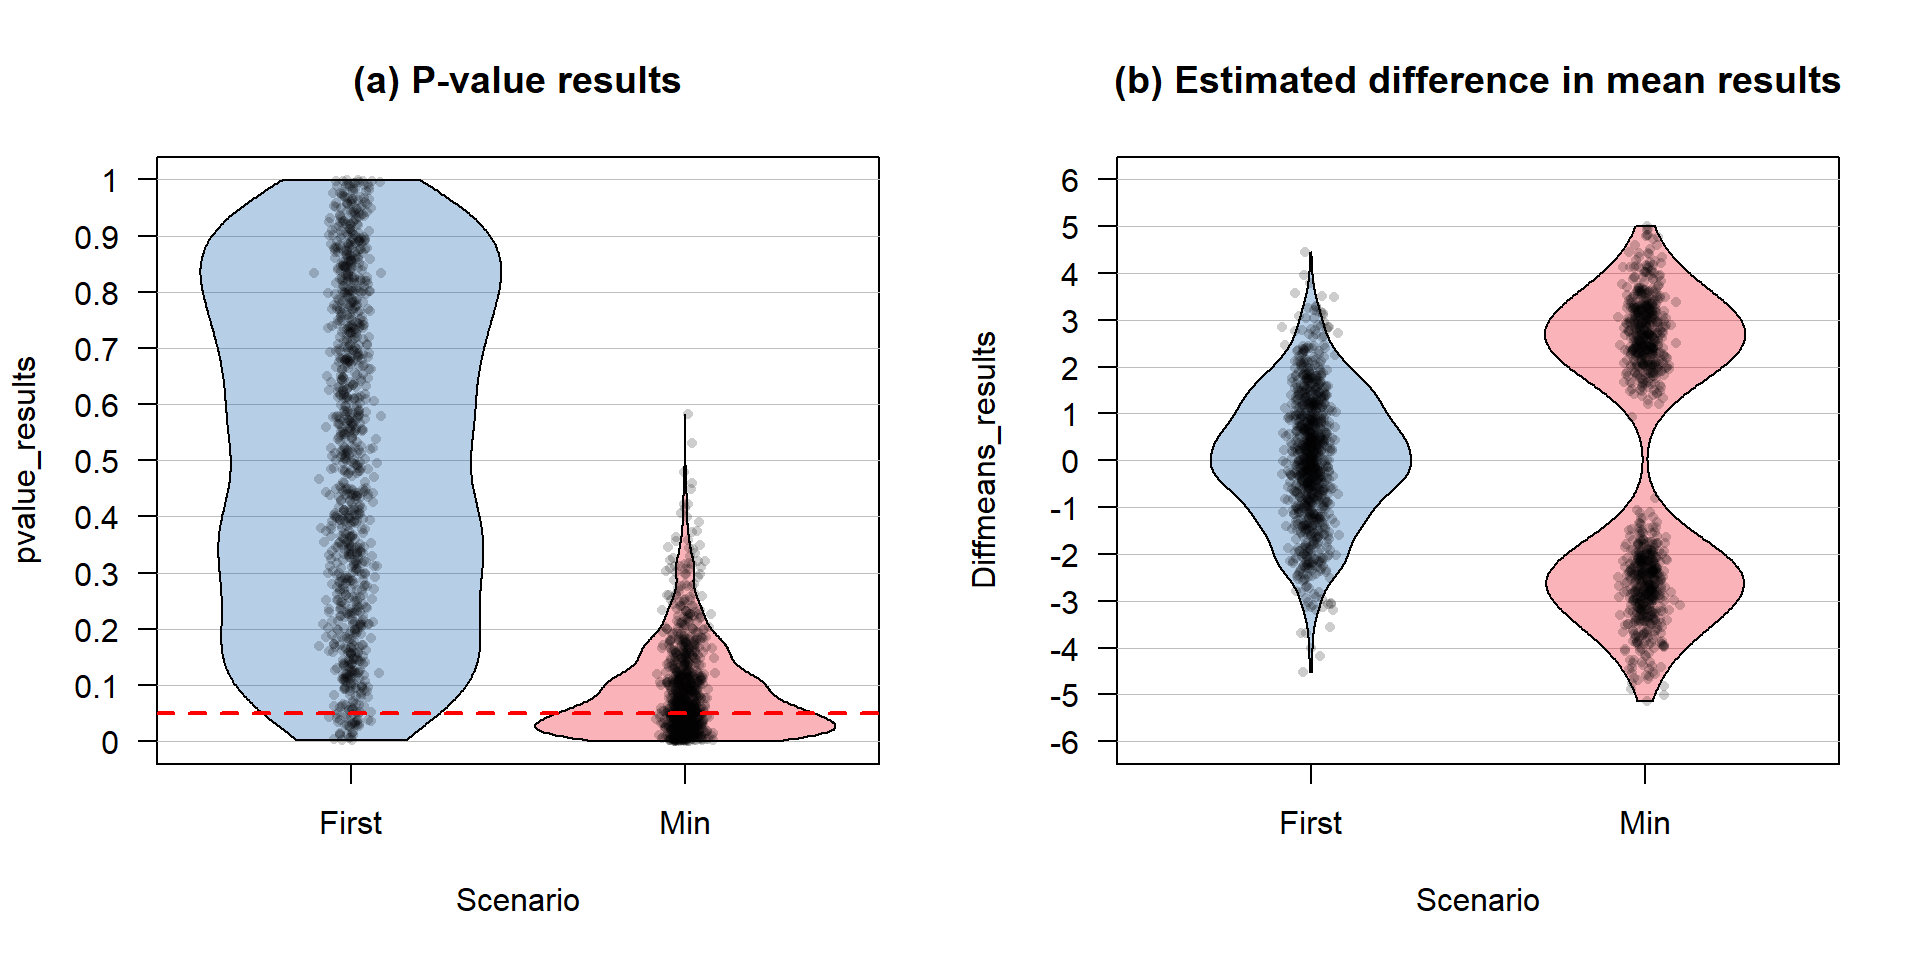 Pirate-plot of a simulation study results. Panel (a) contains the B = 1,000 p-values and (b) contains the B=1,000 estimated differences in the means. Note that the estimated means and confidence intervals normally present in pirate-plots are suppressed here with inf.f.o = 0, inf.b.o = 0, avg.line.o = 0 because these plots are being used to summarize simulation results instead of an original data set.